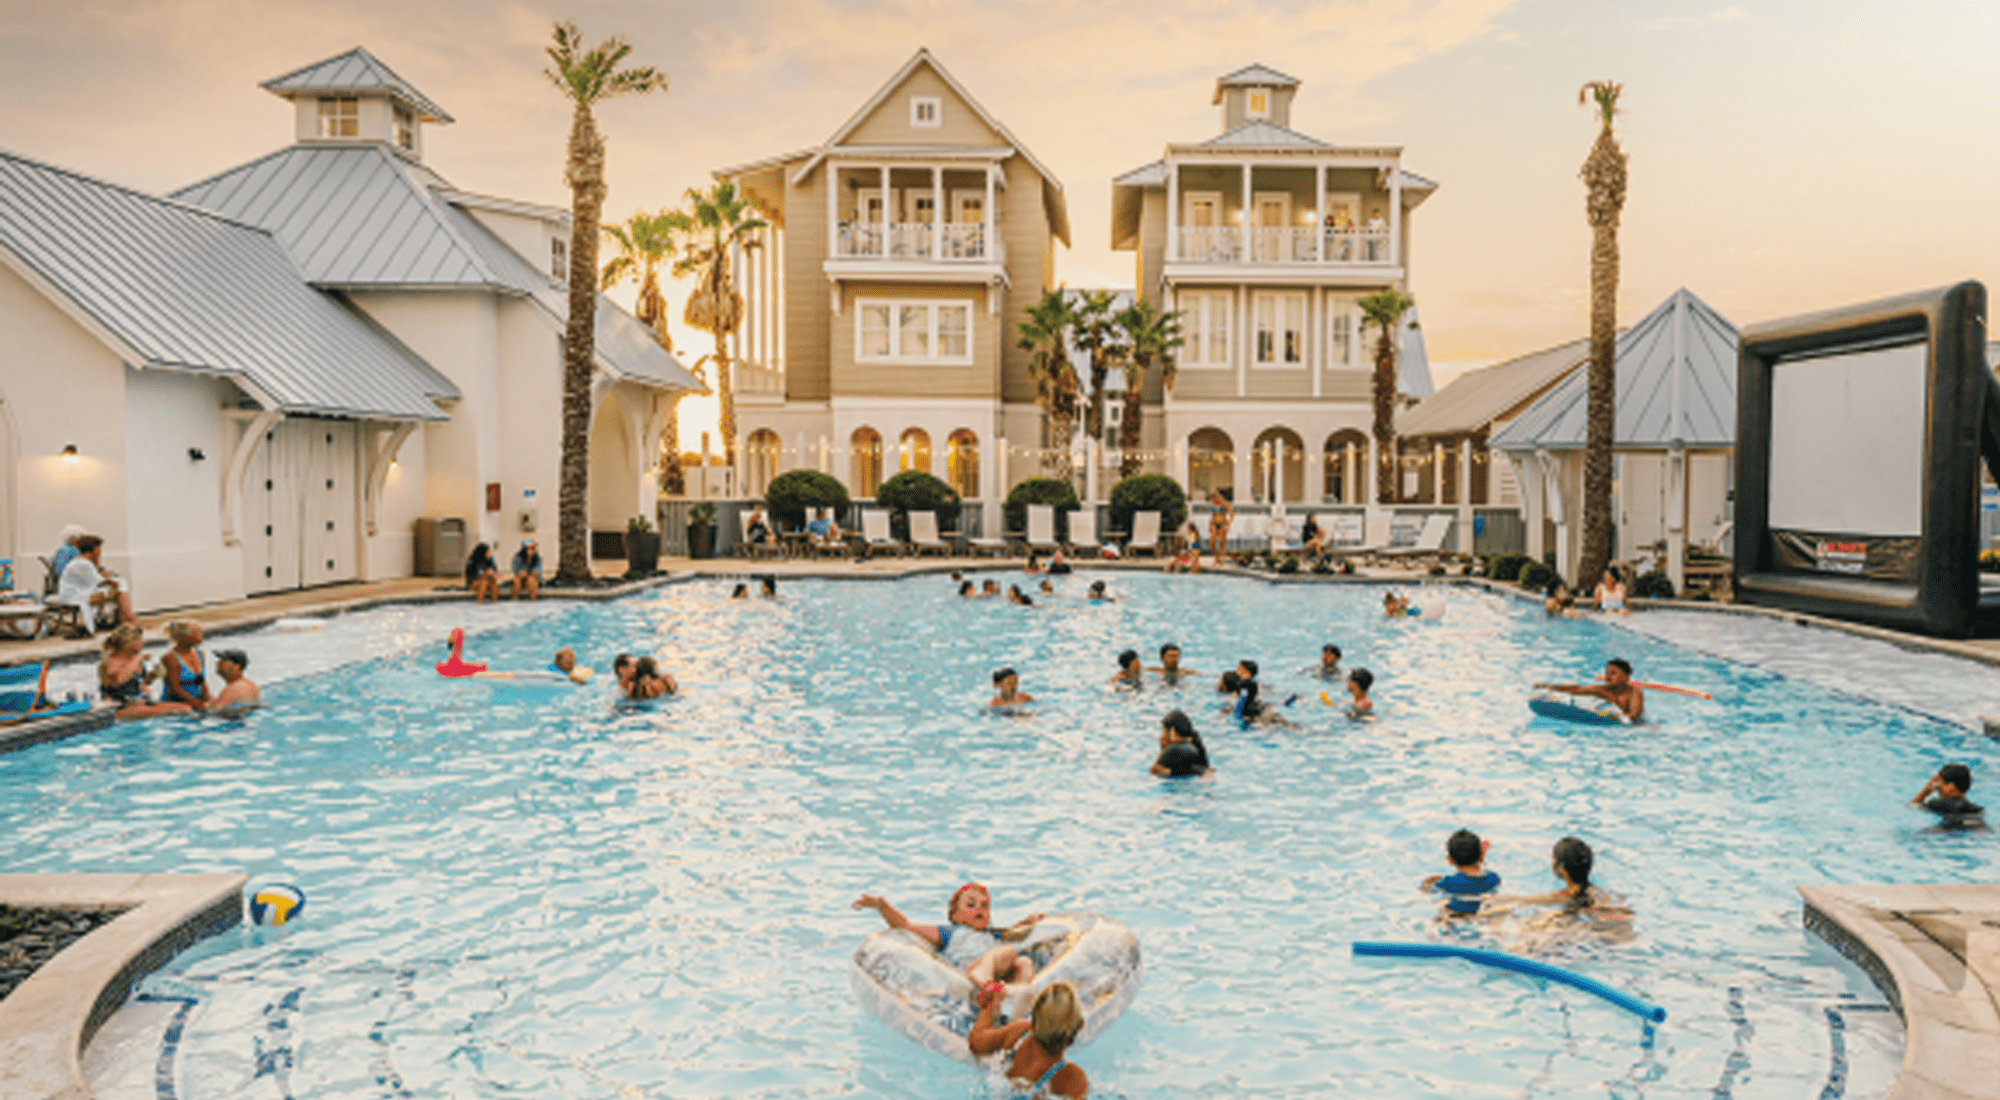 Happenings in Port Aransas and Palmilla Beach featuring the community pool with families swimming